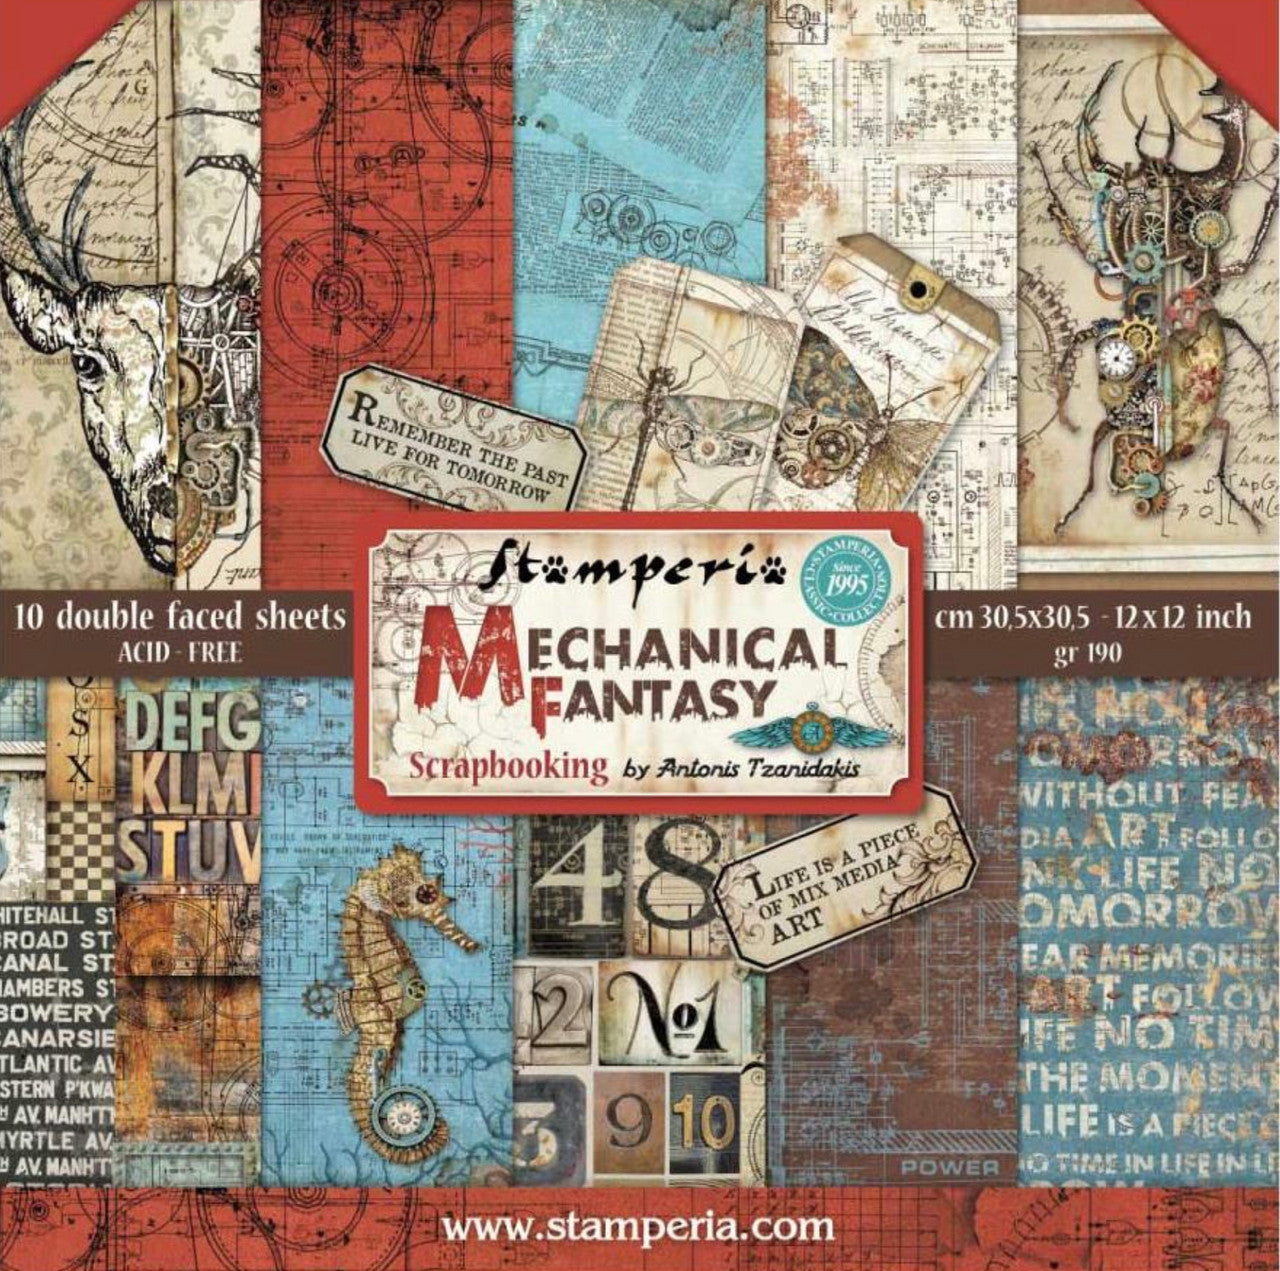 Stamperia Mechanical Fantasy Paper Pack 12” x 12”